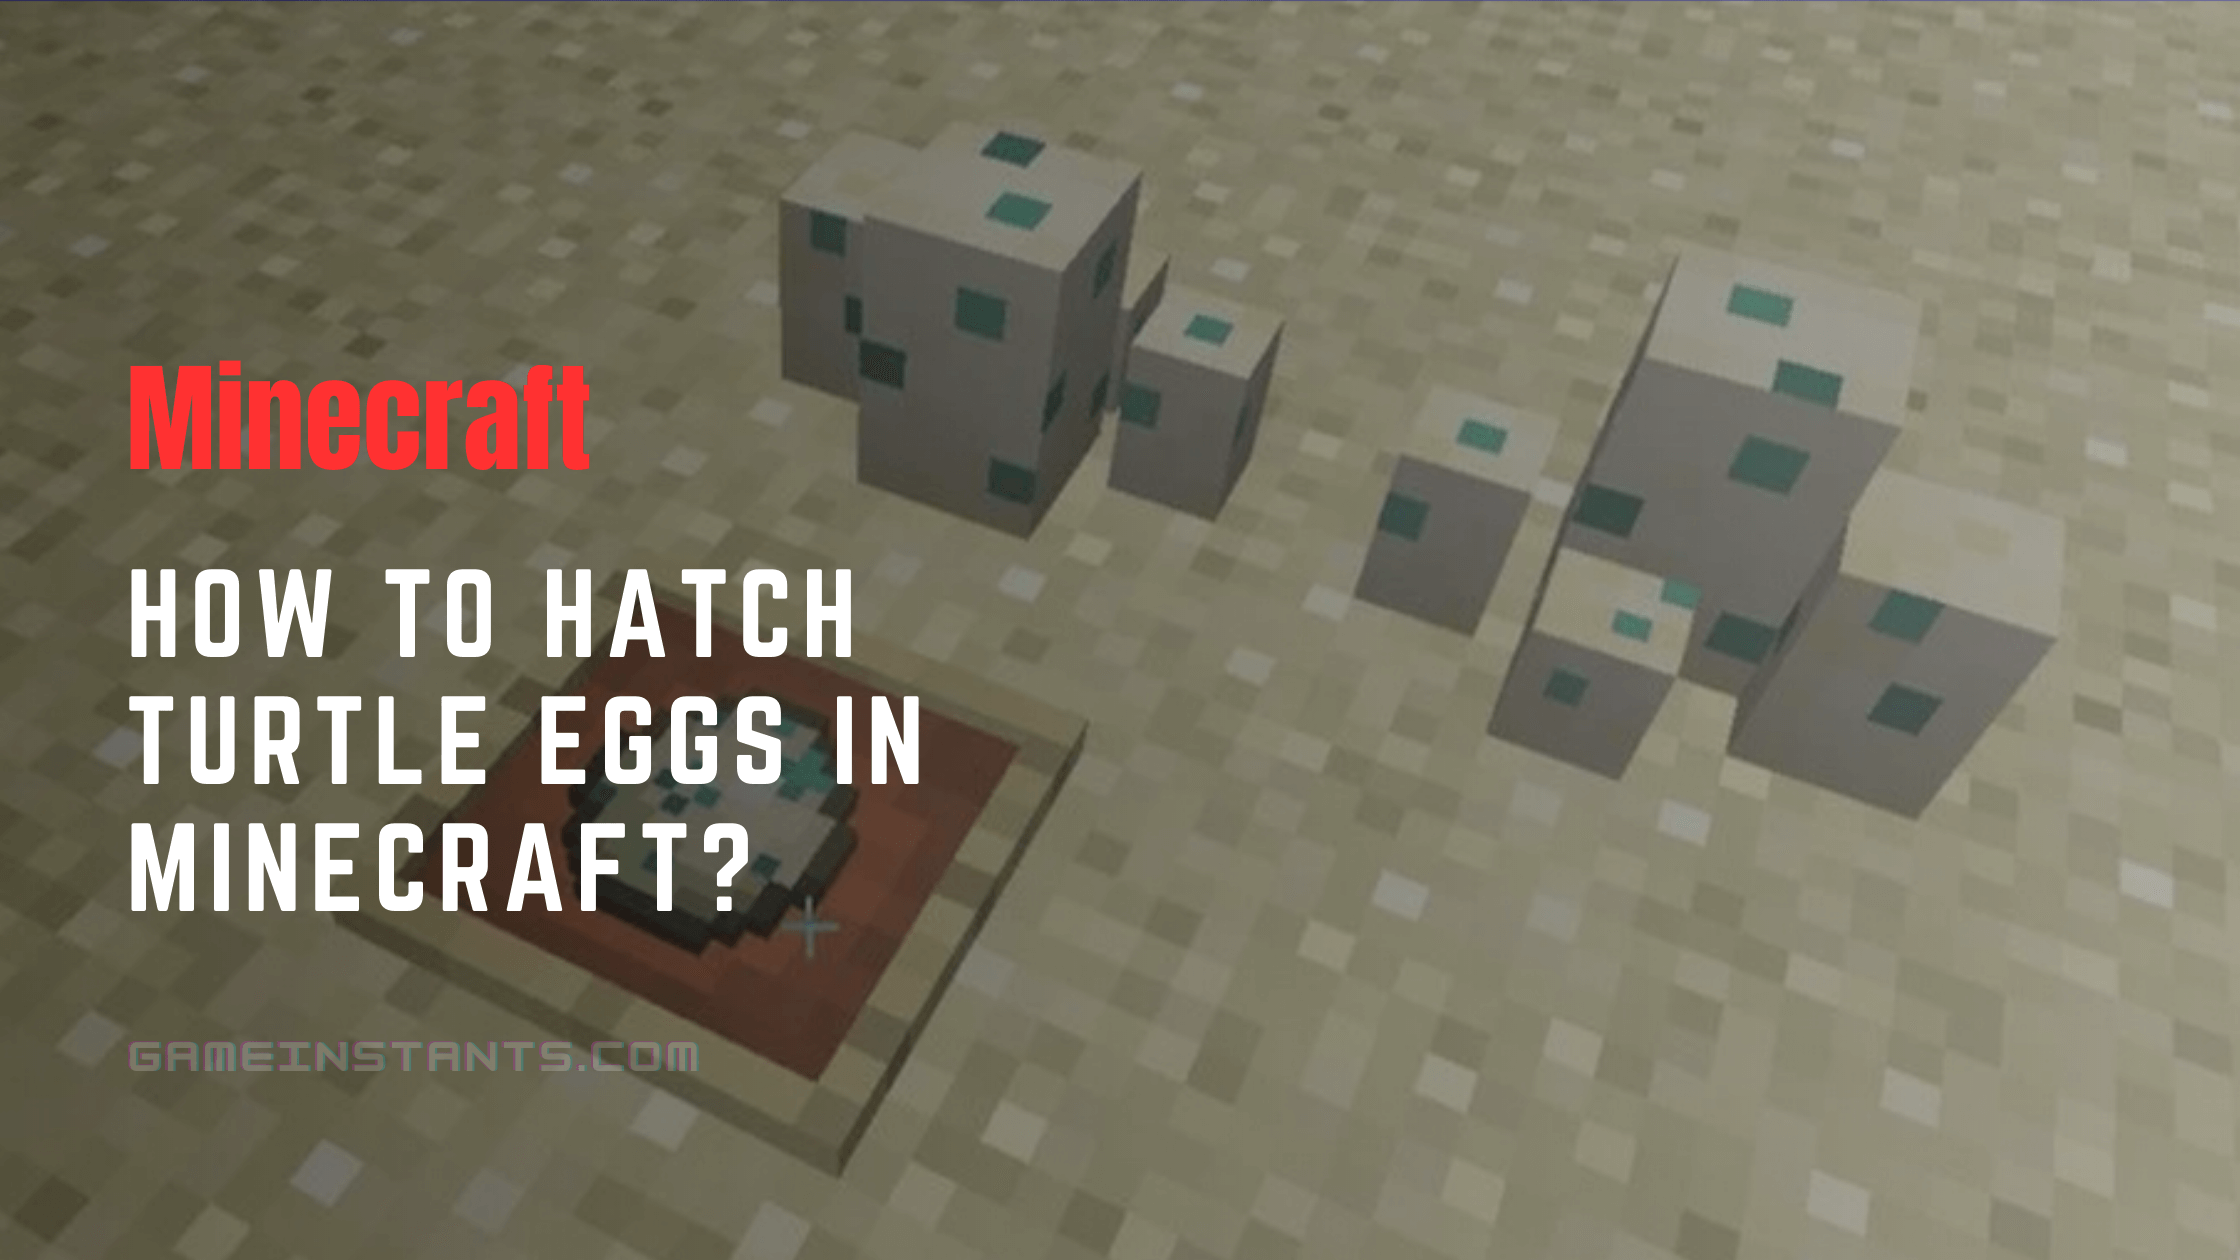 How To Hatch Turtle Eggs In Minecraft